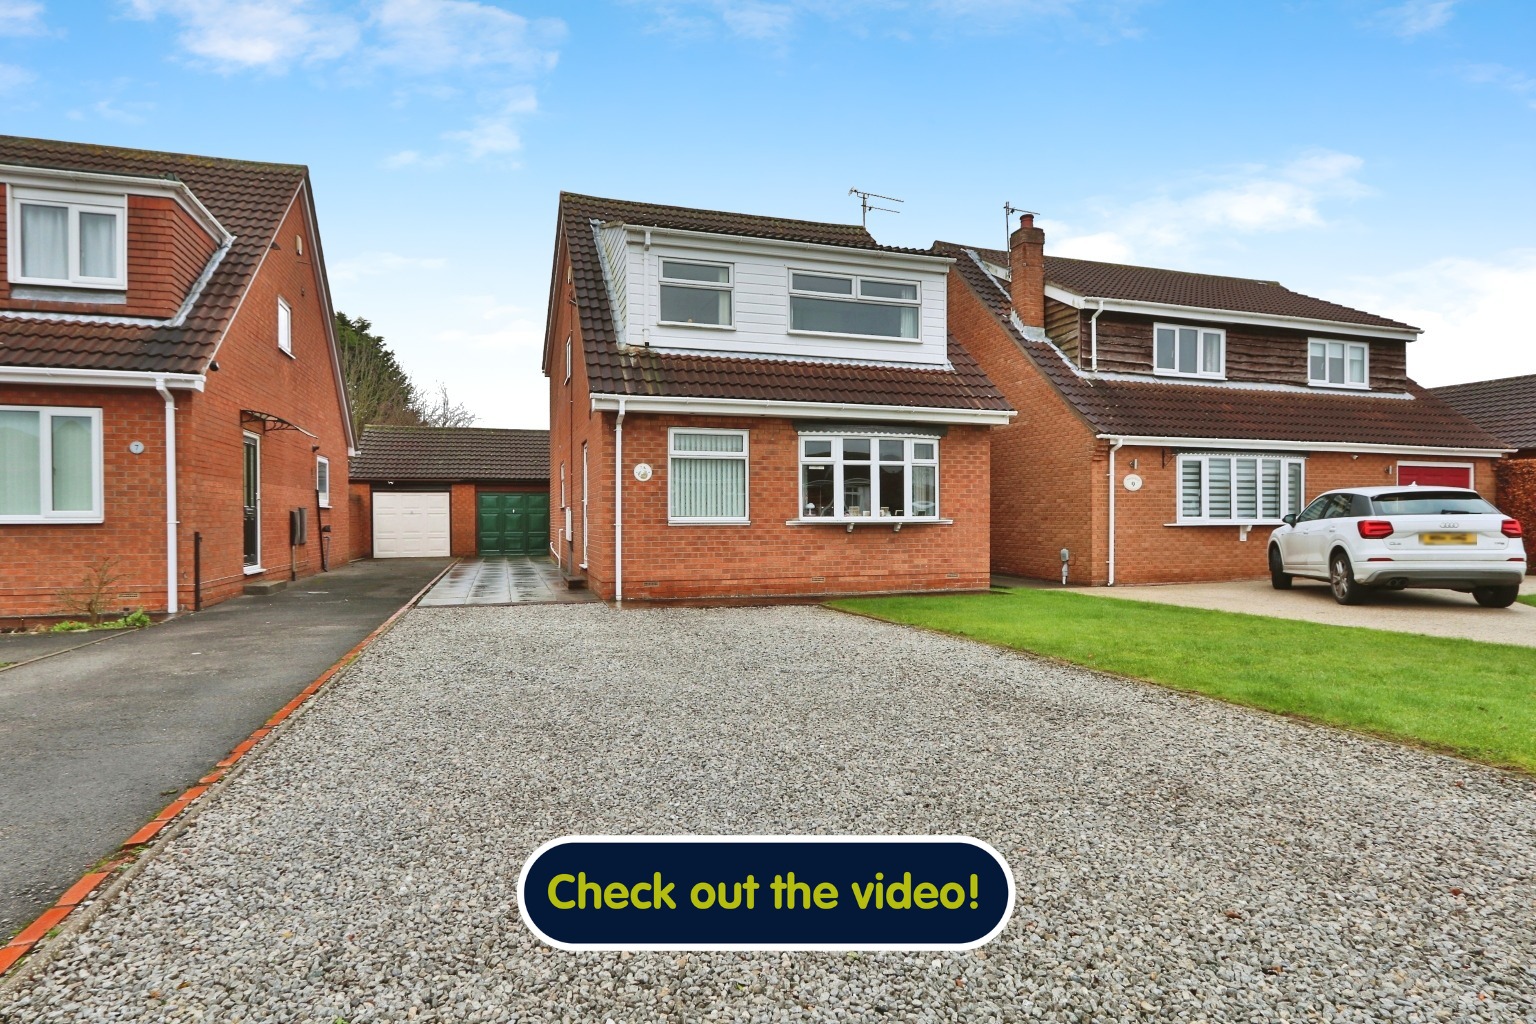 4 bed detached house for sale in Charles Street, Hull - Property Image 1